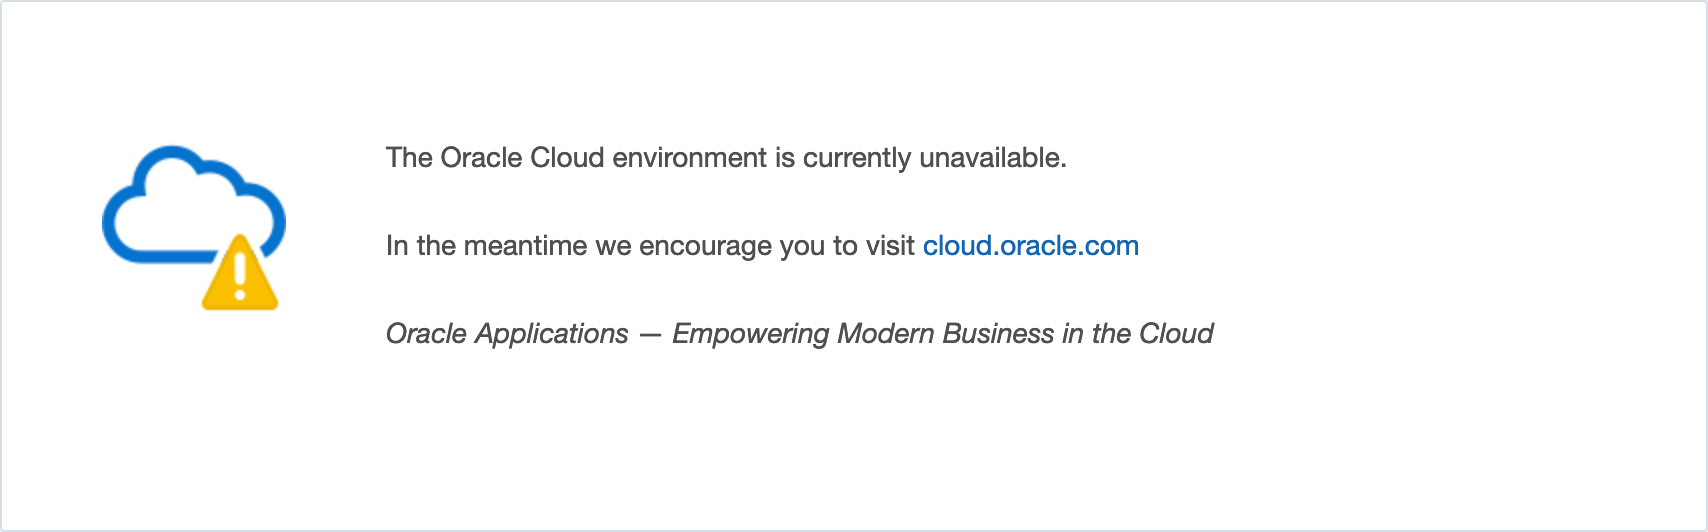 Oracle Cloud, planned outage